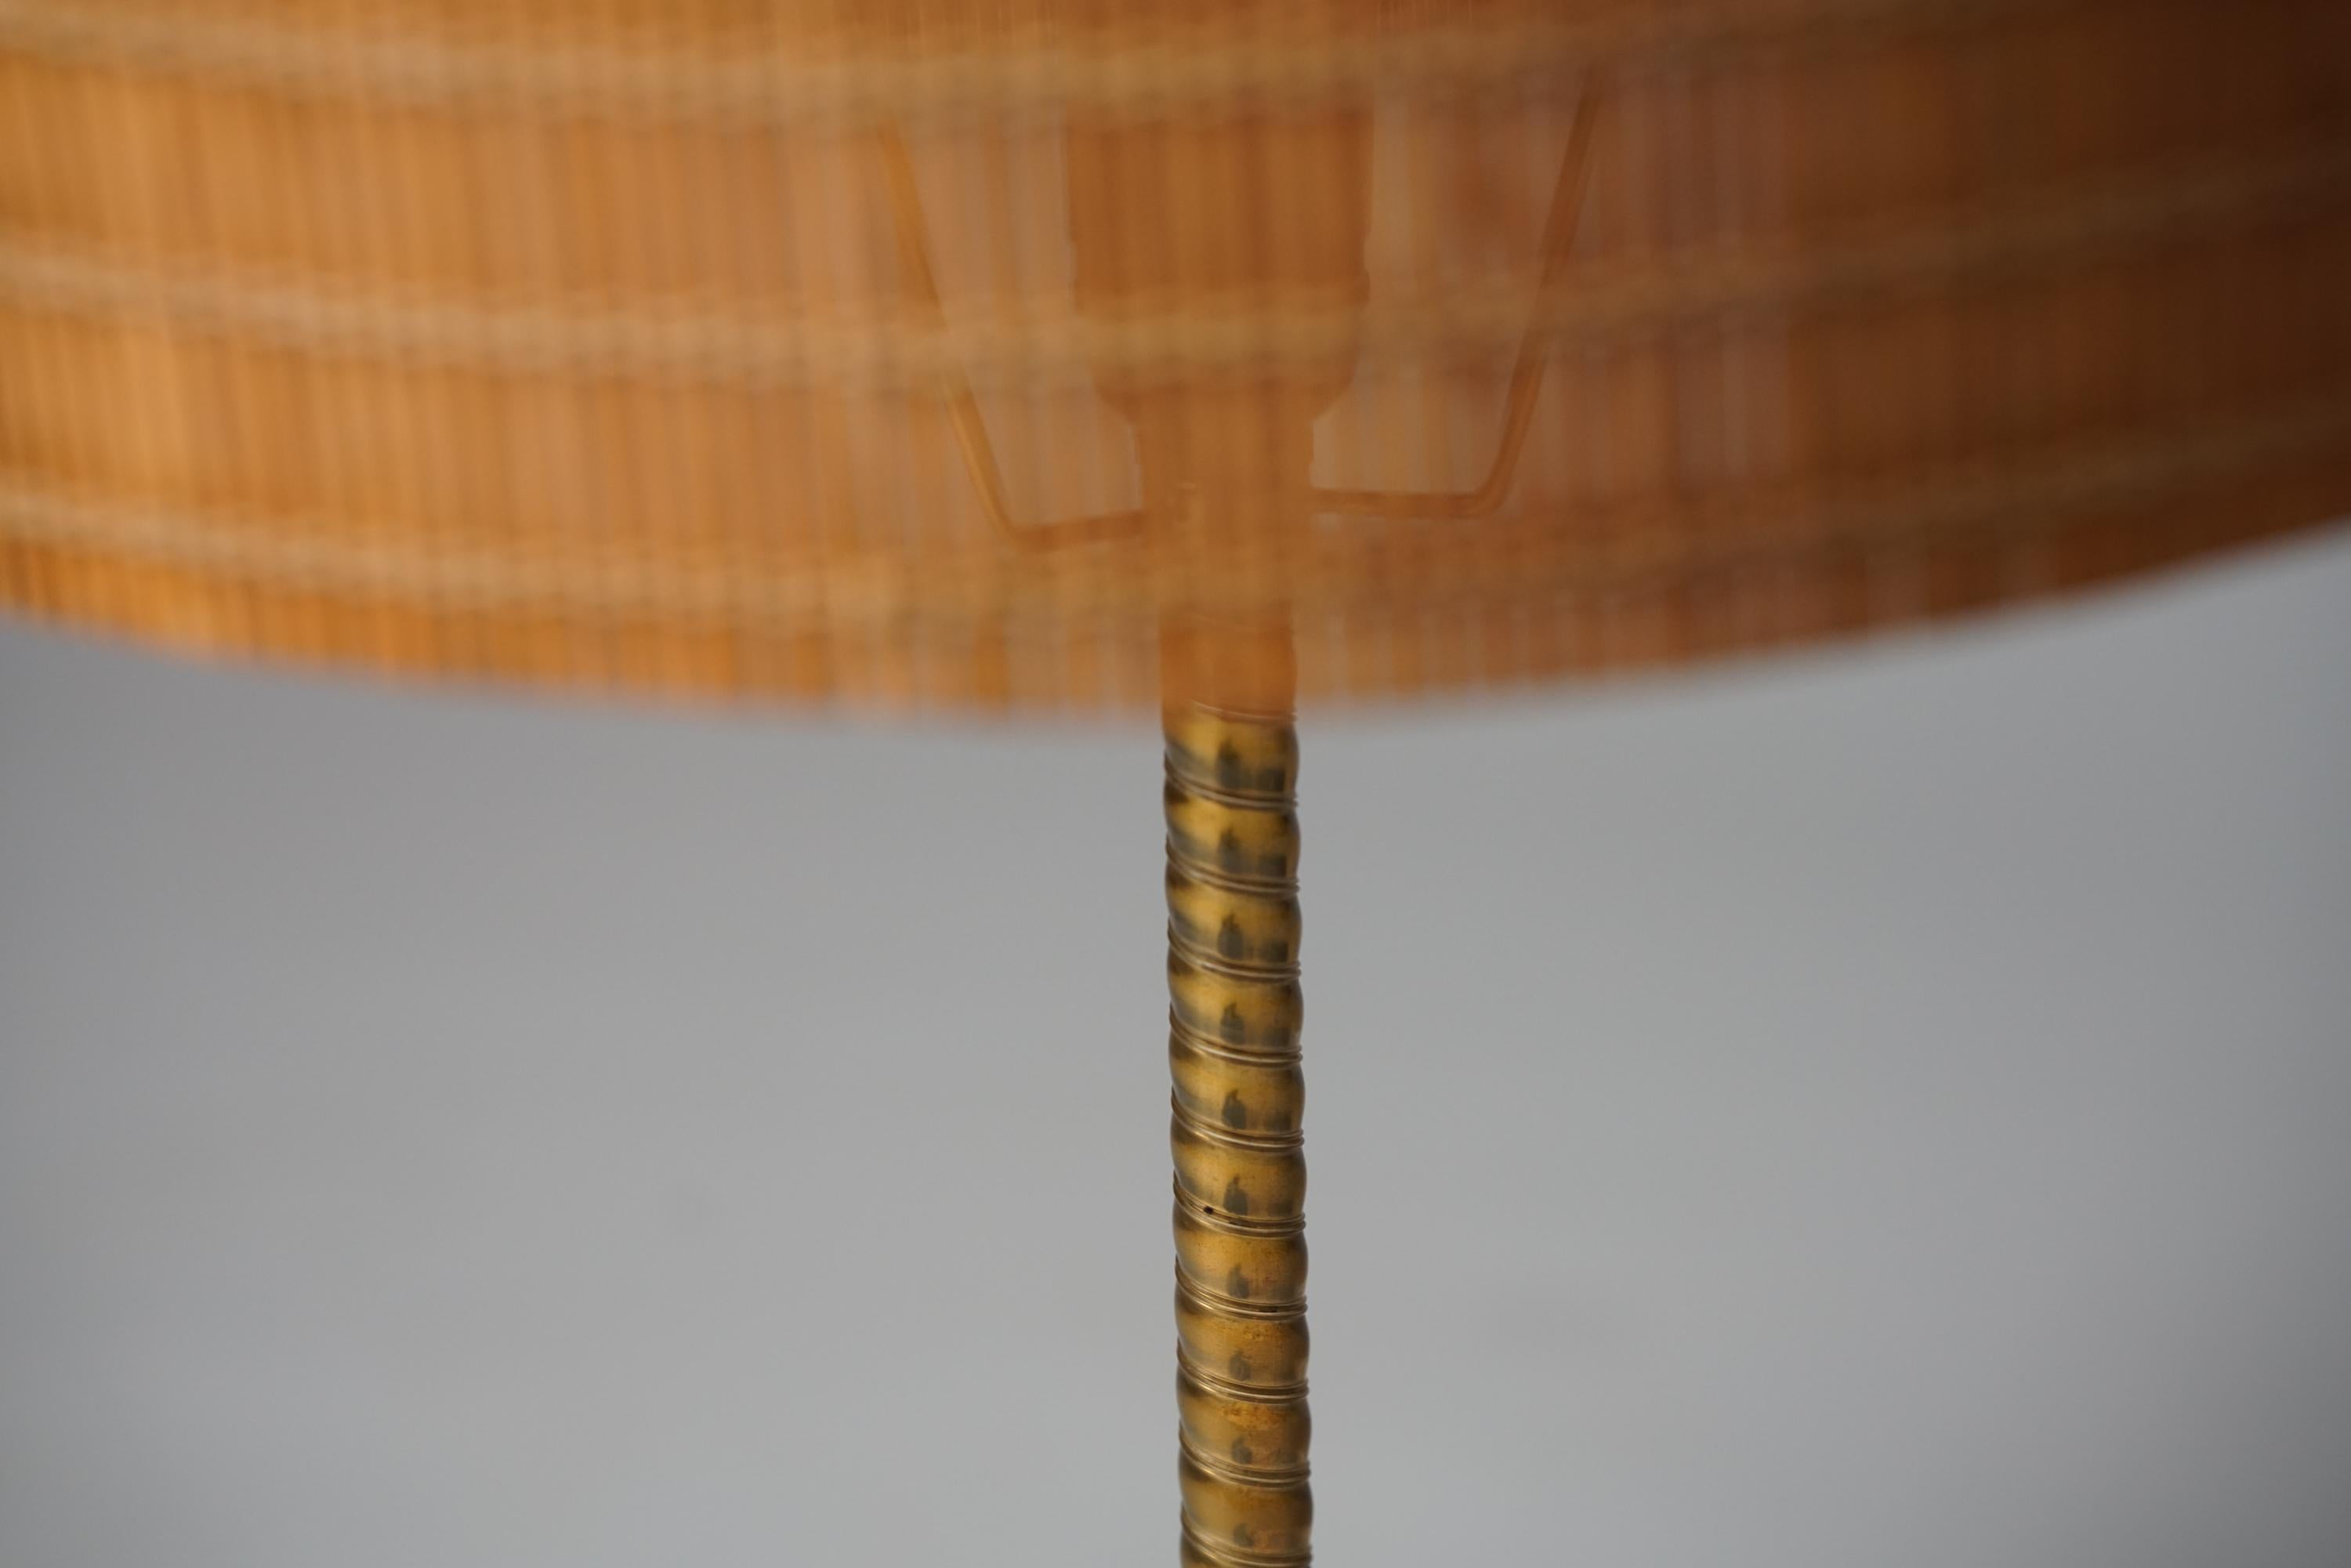 Rare Lisa Johansson-Pape Table Lamp, Orno Oy, 1940/1950s For Sale 6